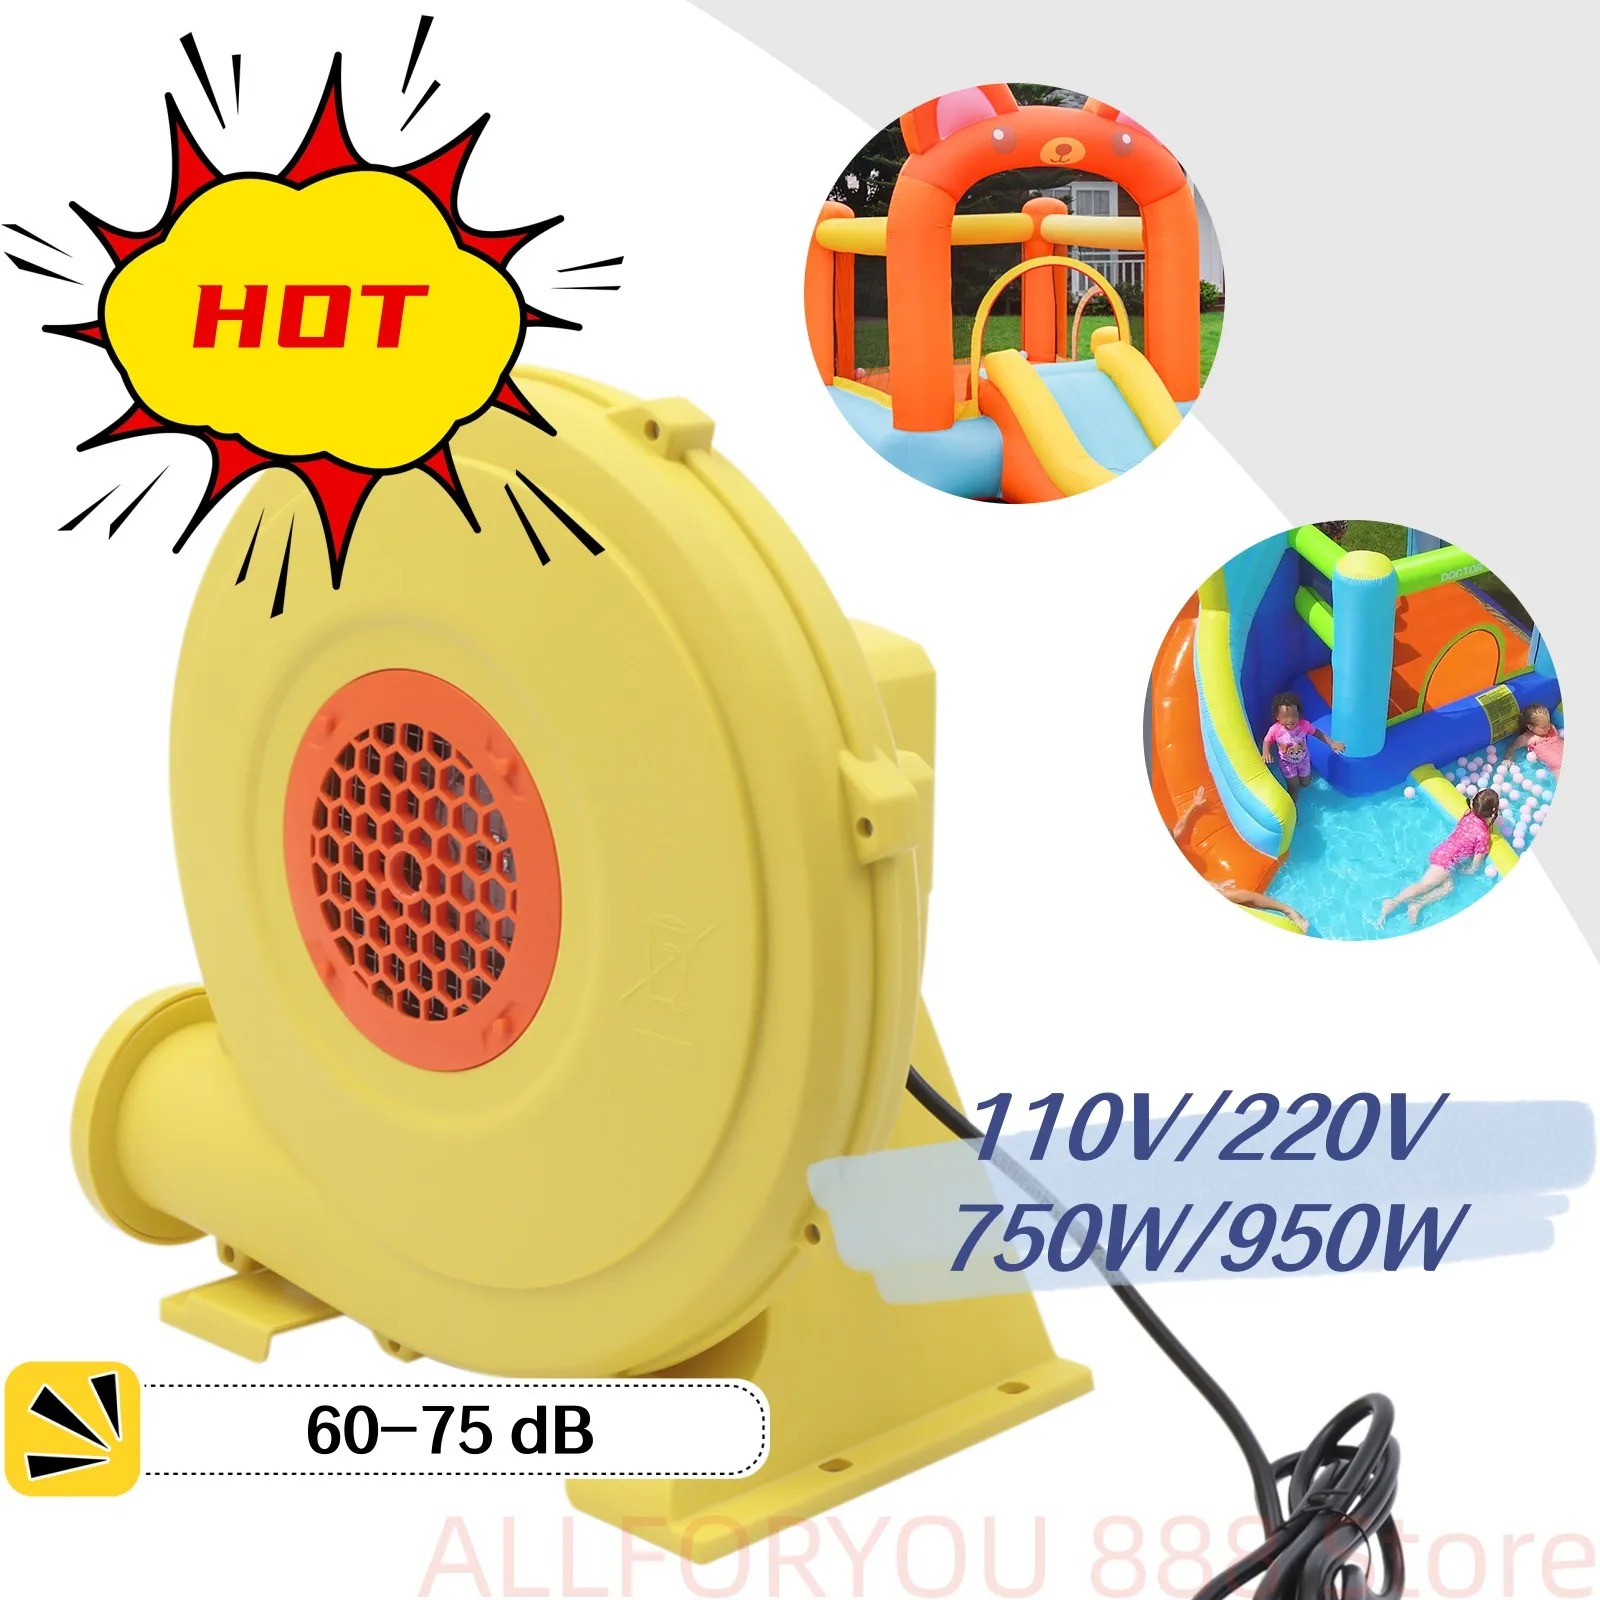 750W/950W Air Blower Commercial Inflatable Fan Bounce Fan For Bouncy Castle 110V/220V inflatable punching bag blow up boxing training bag for kickboxing practice bounce back freestanding punch bag gift dropshipping